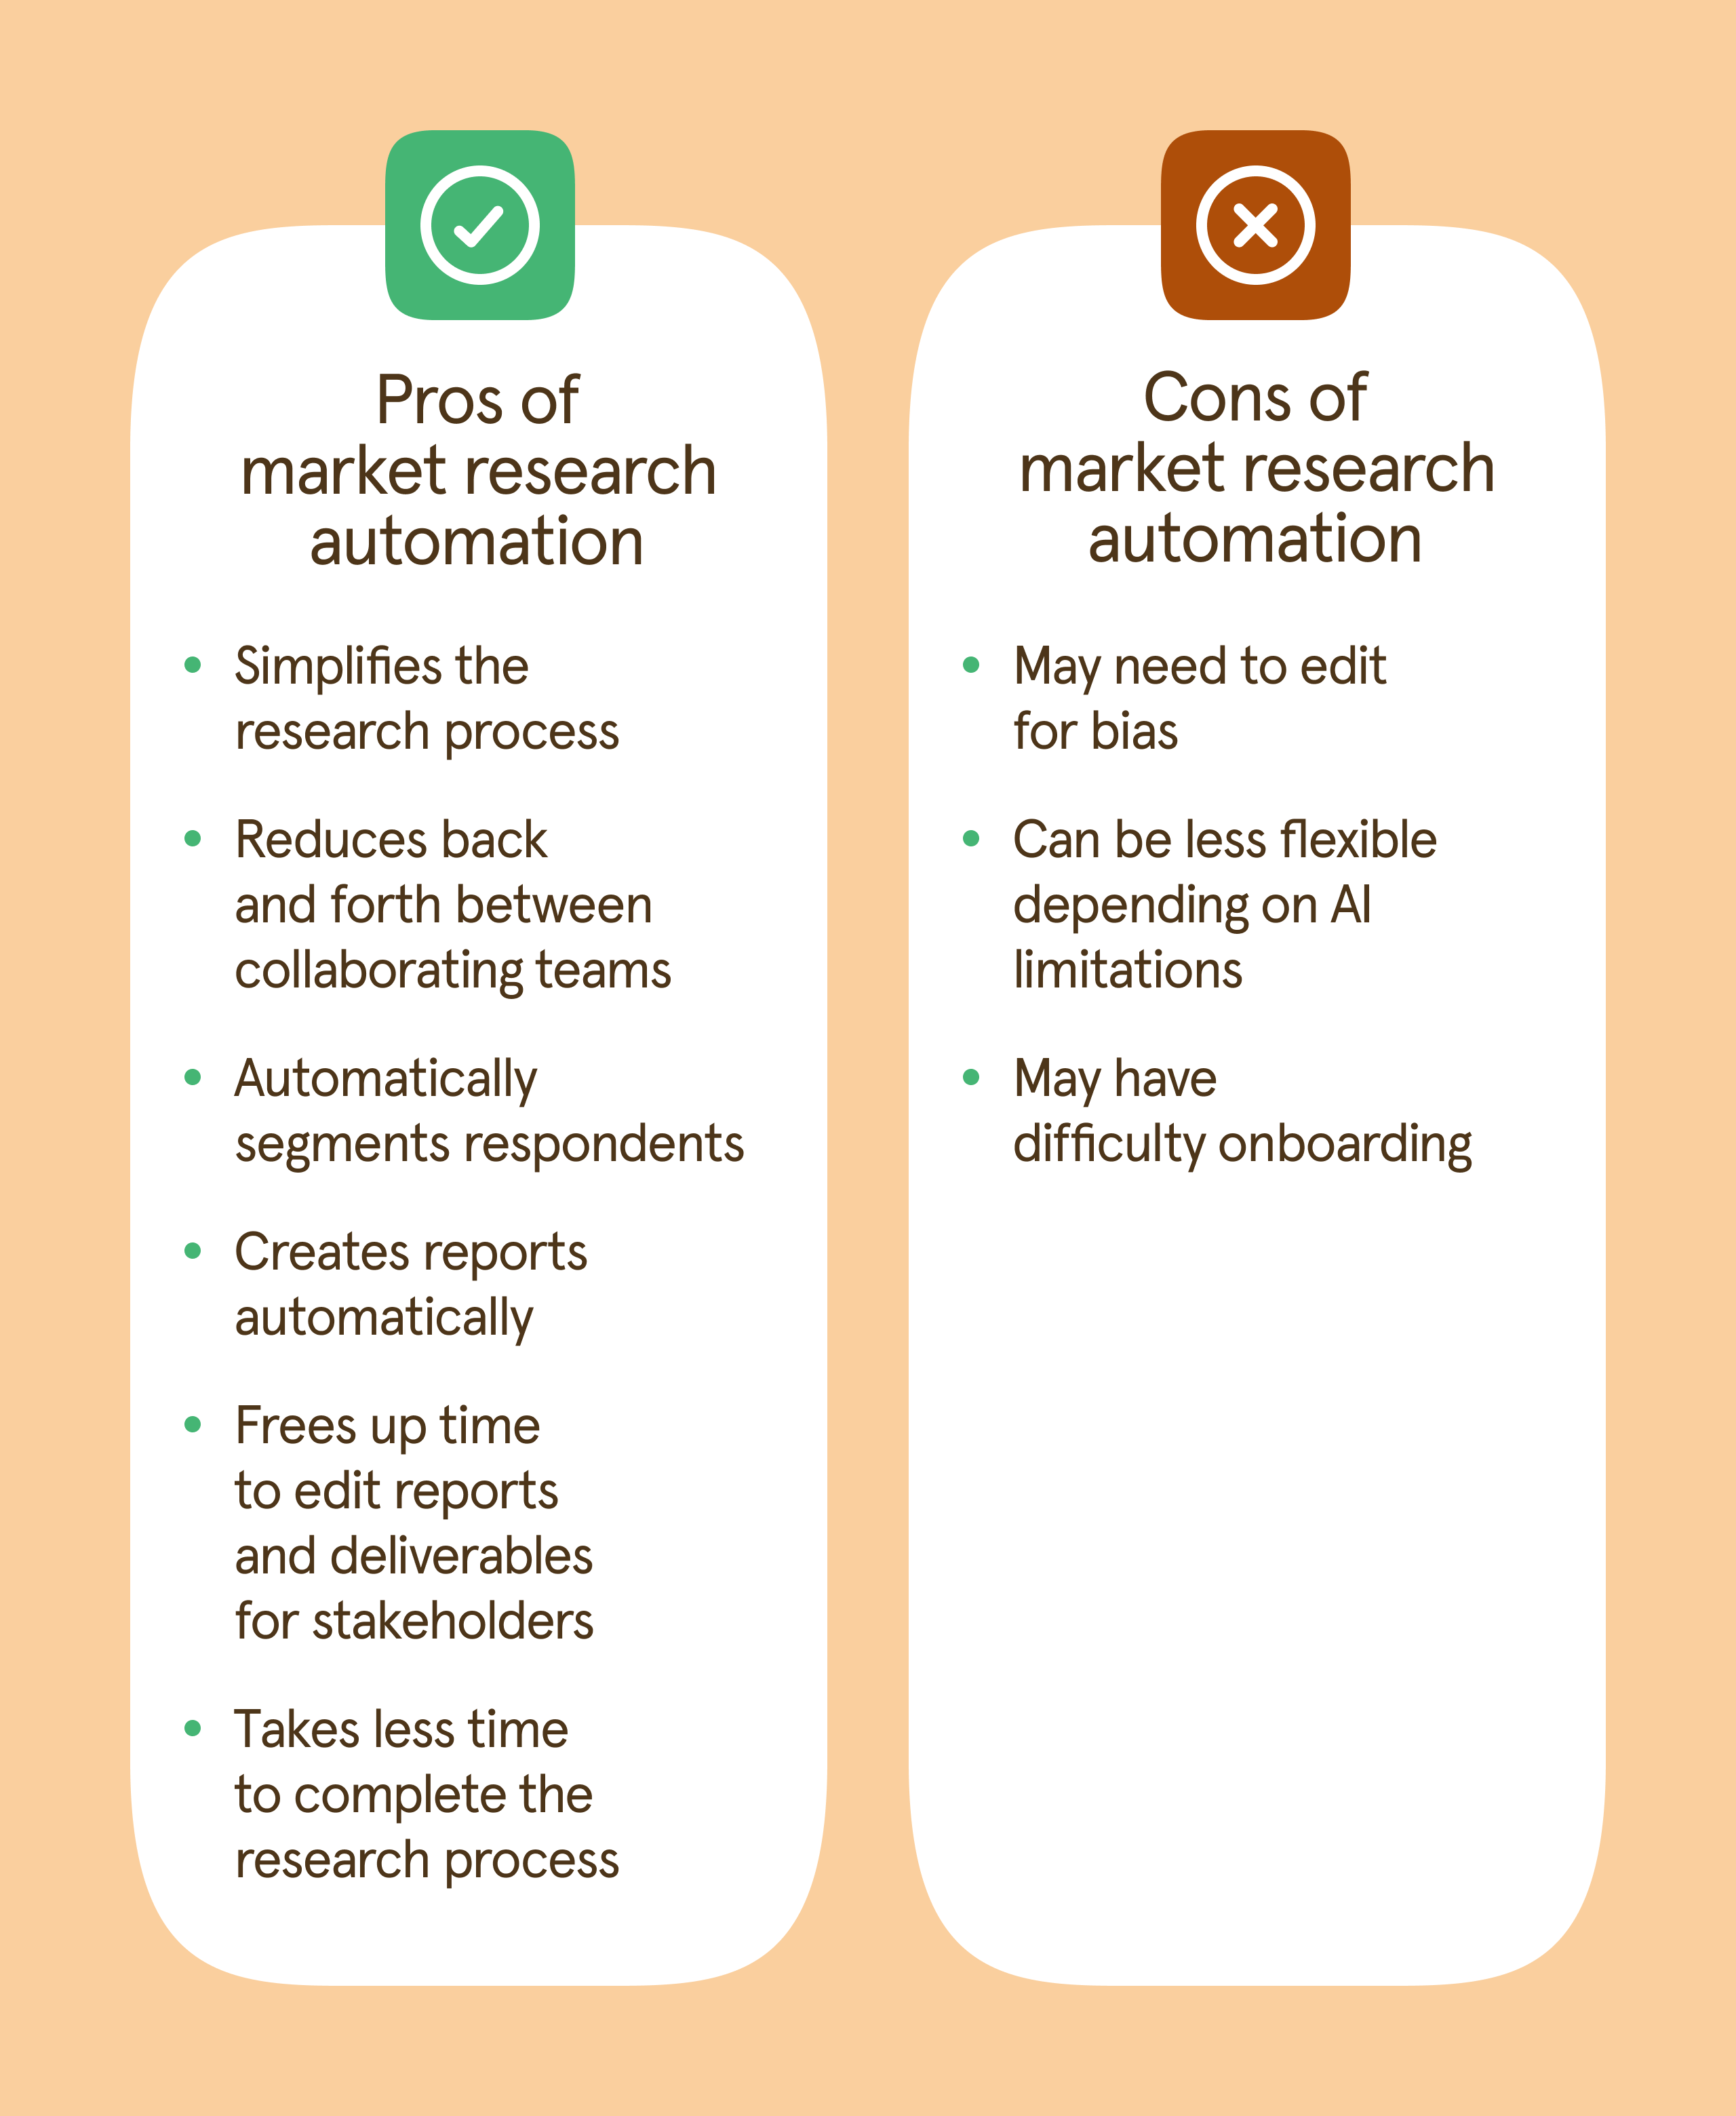 Chart recaps the pros and cons of market research automation.